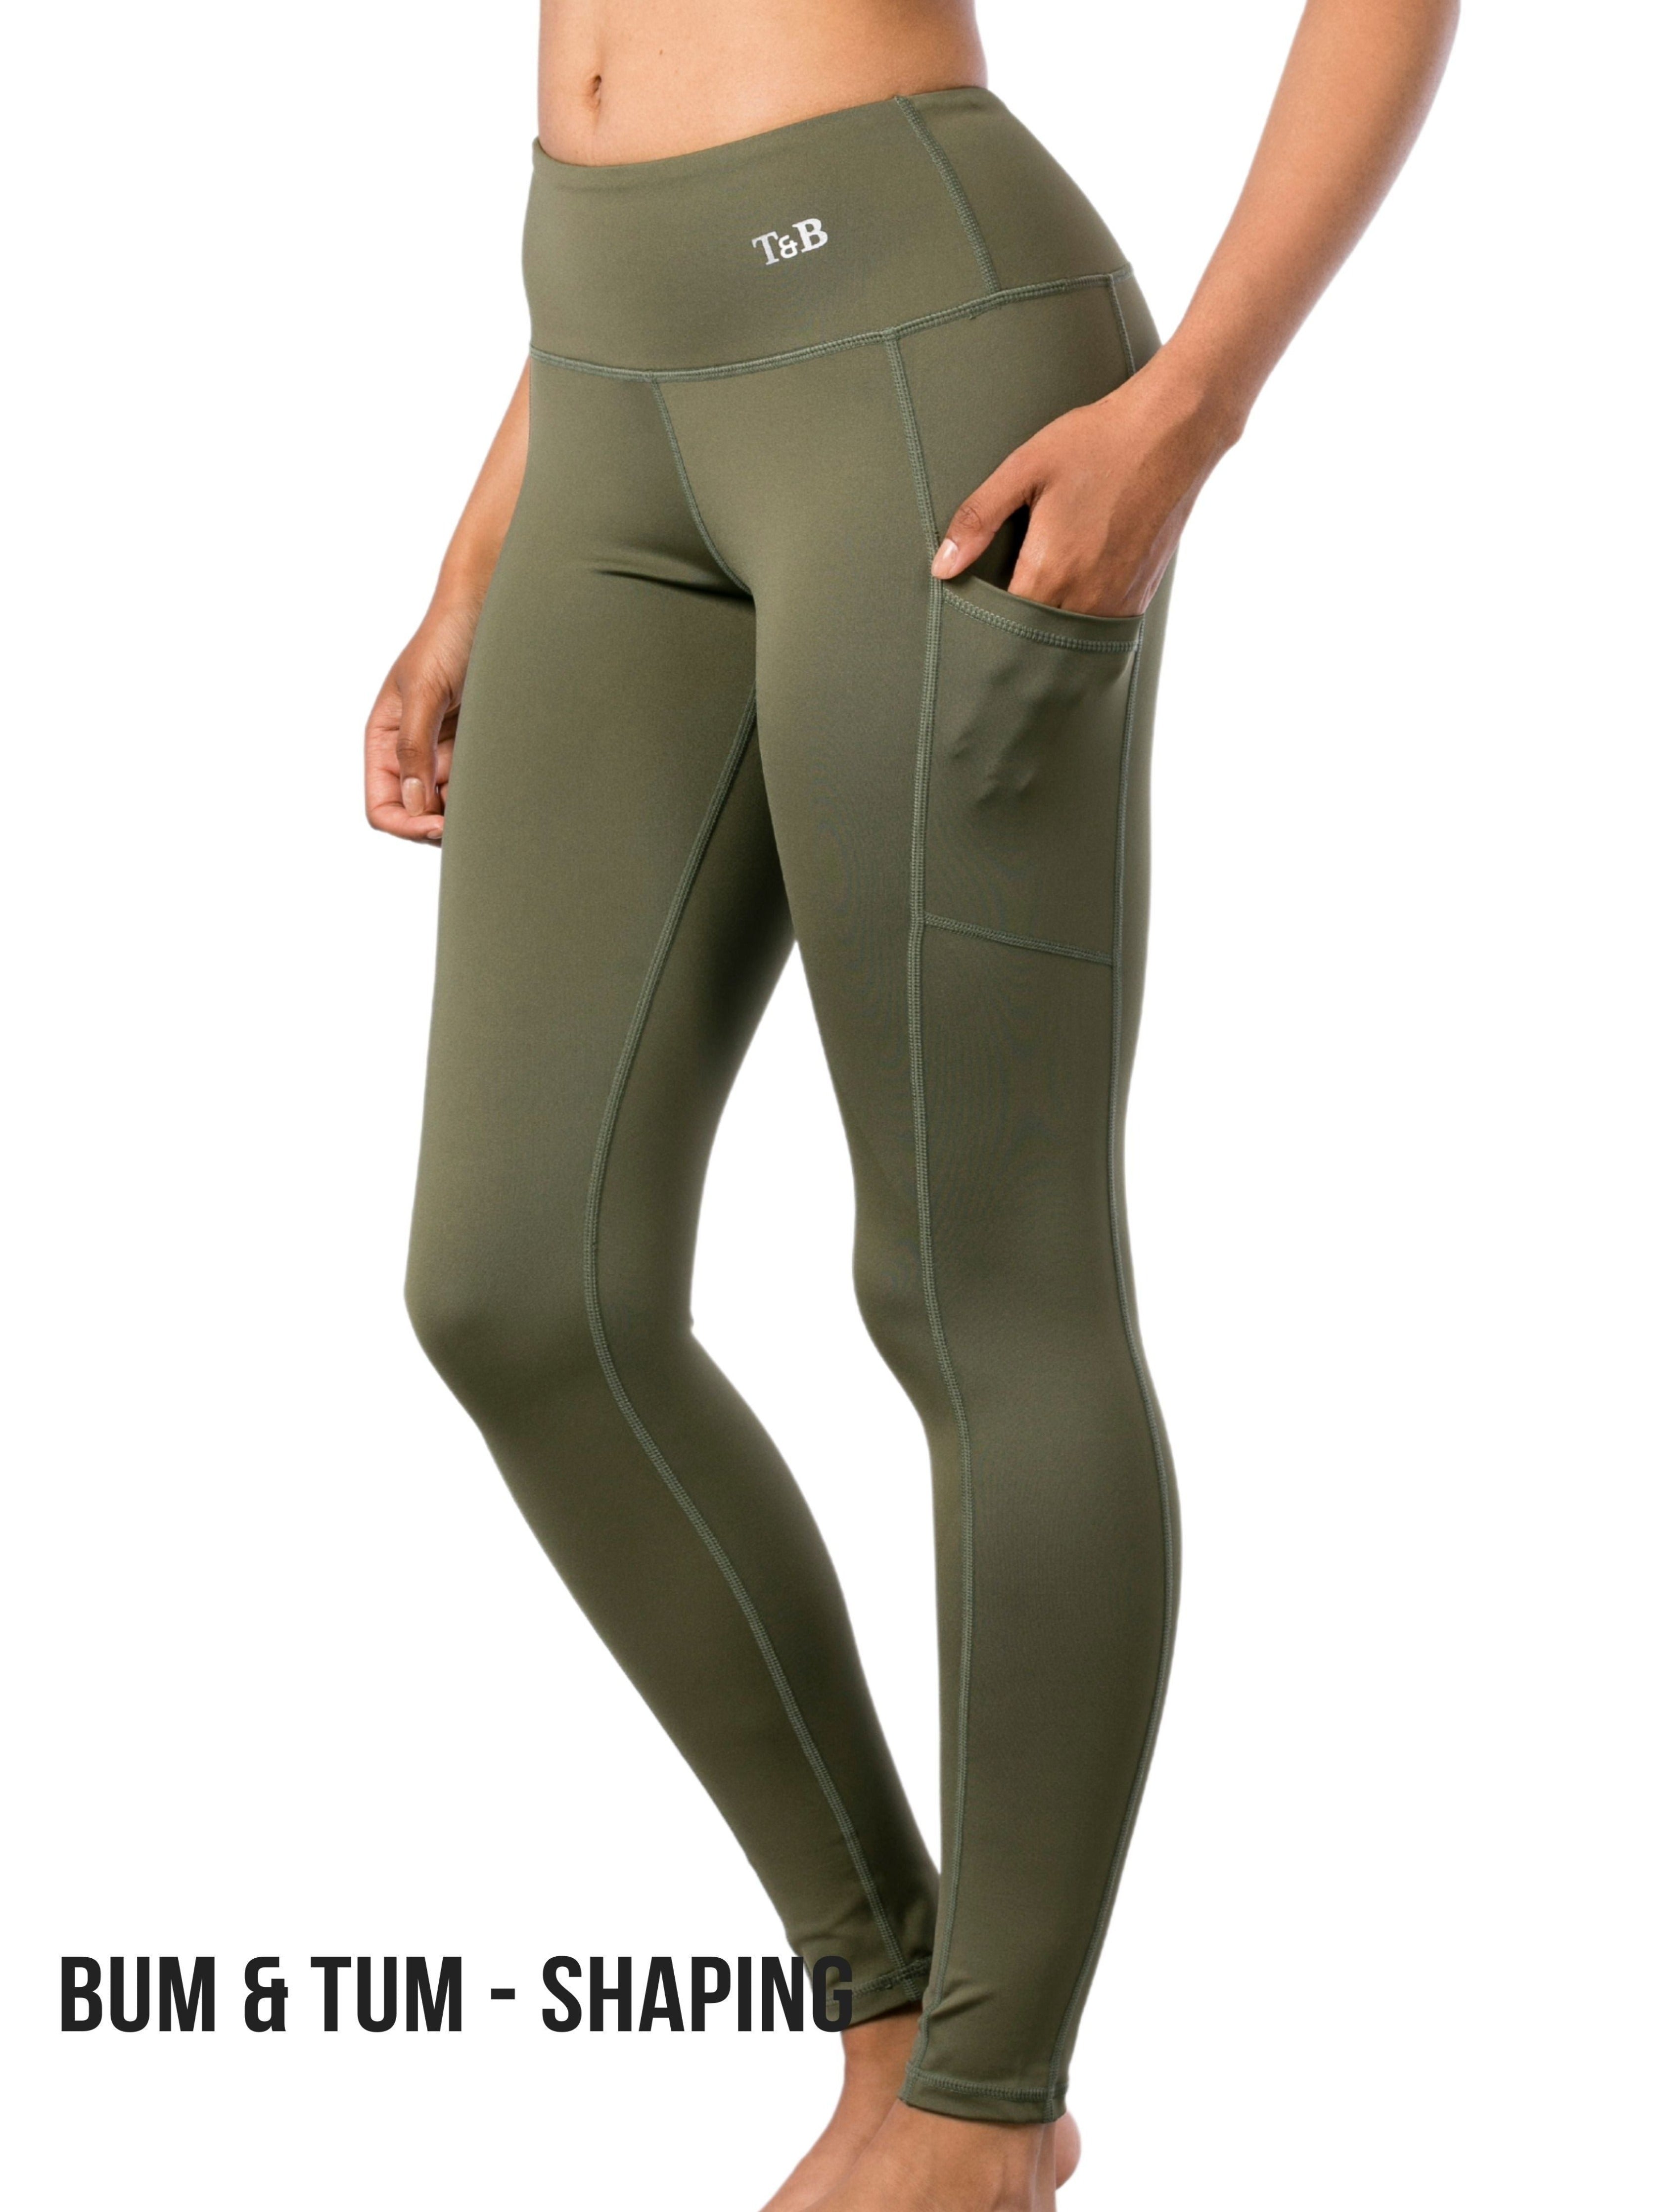 Trendy and Bendy high performing leggings in olive green provide figure shaping support, with high-waisted compression & cellulite control. Designed for yoga, pilates, running, high & low intensity workouts, they are 100% squat proof.